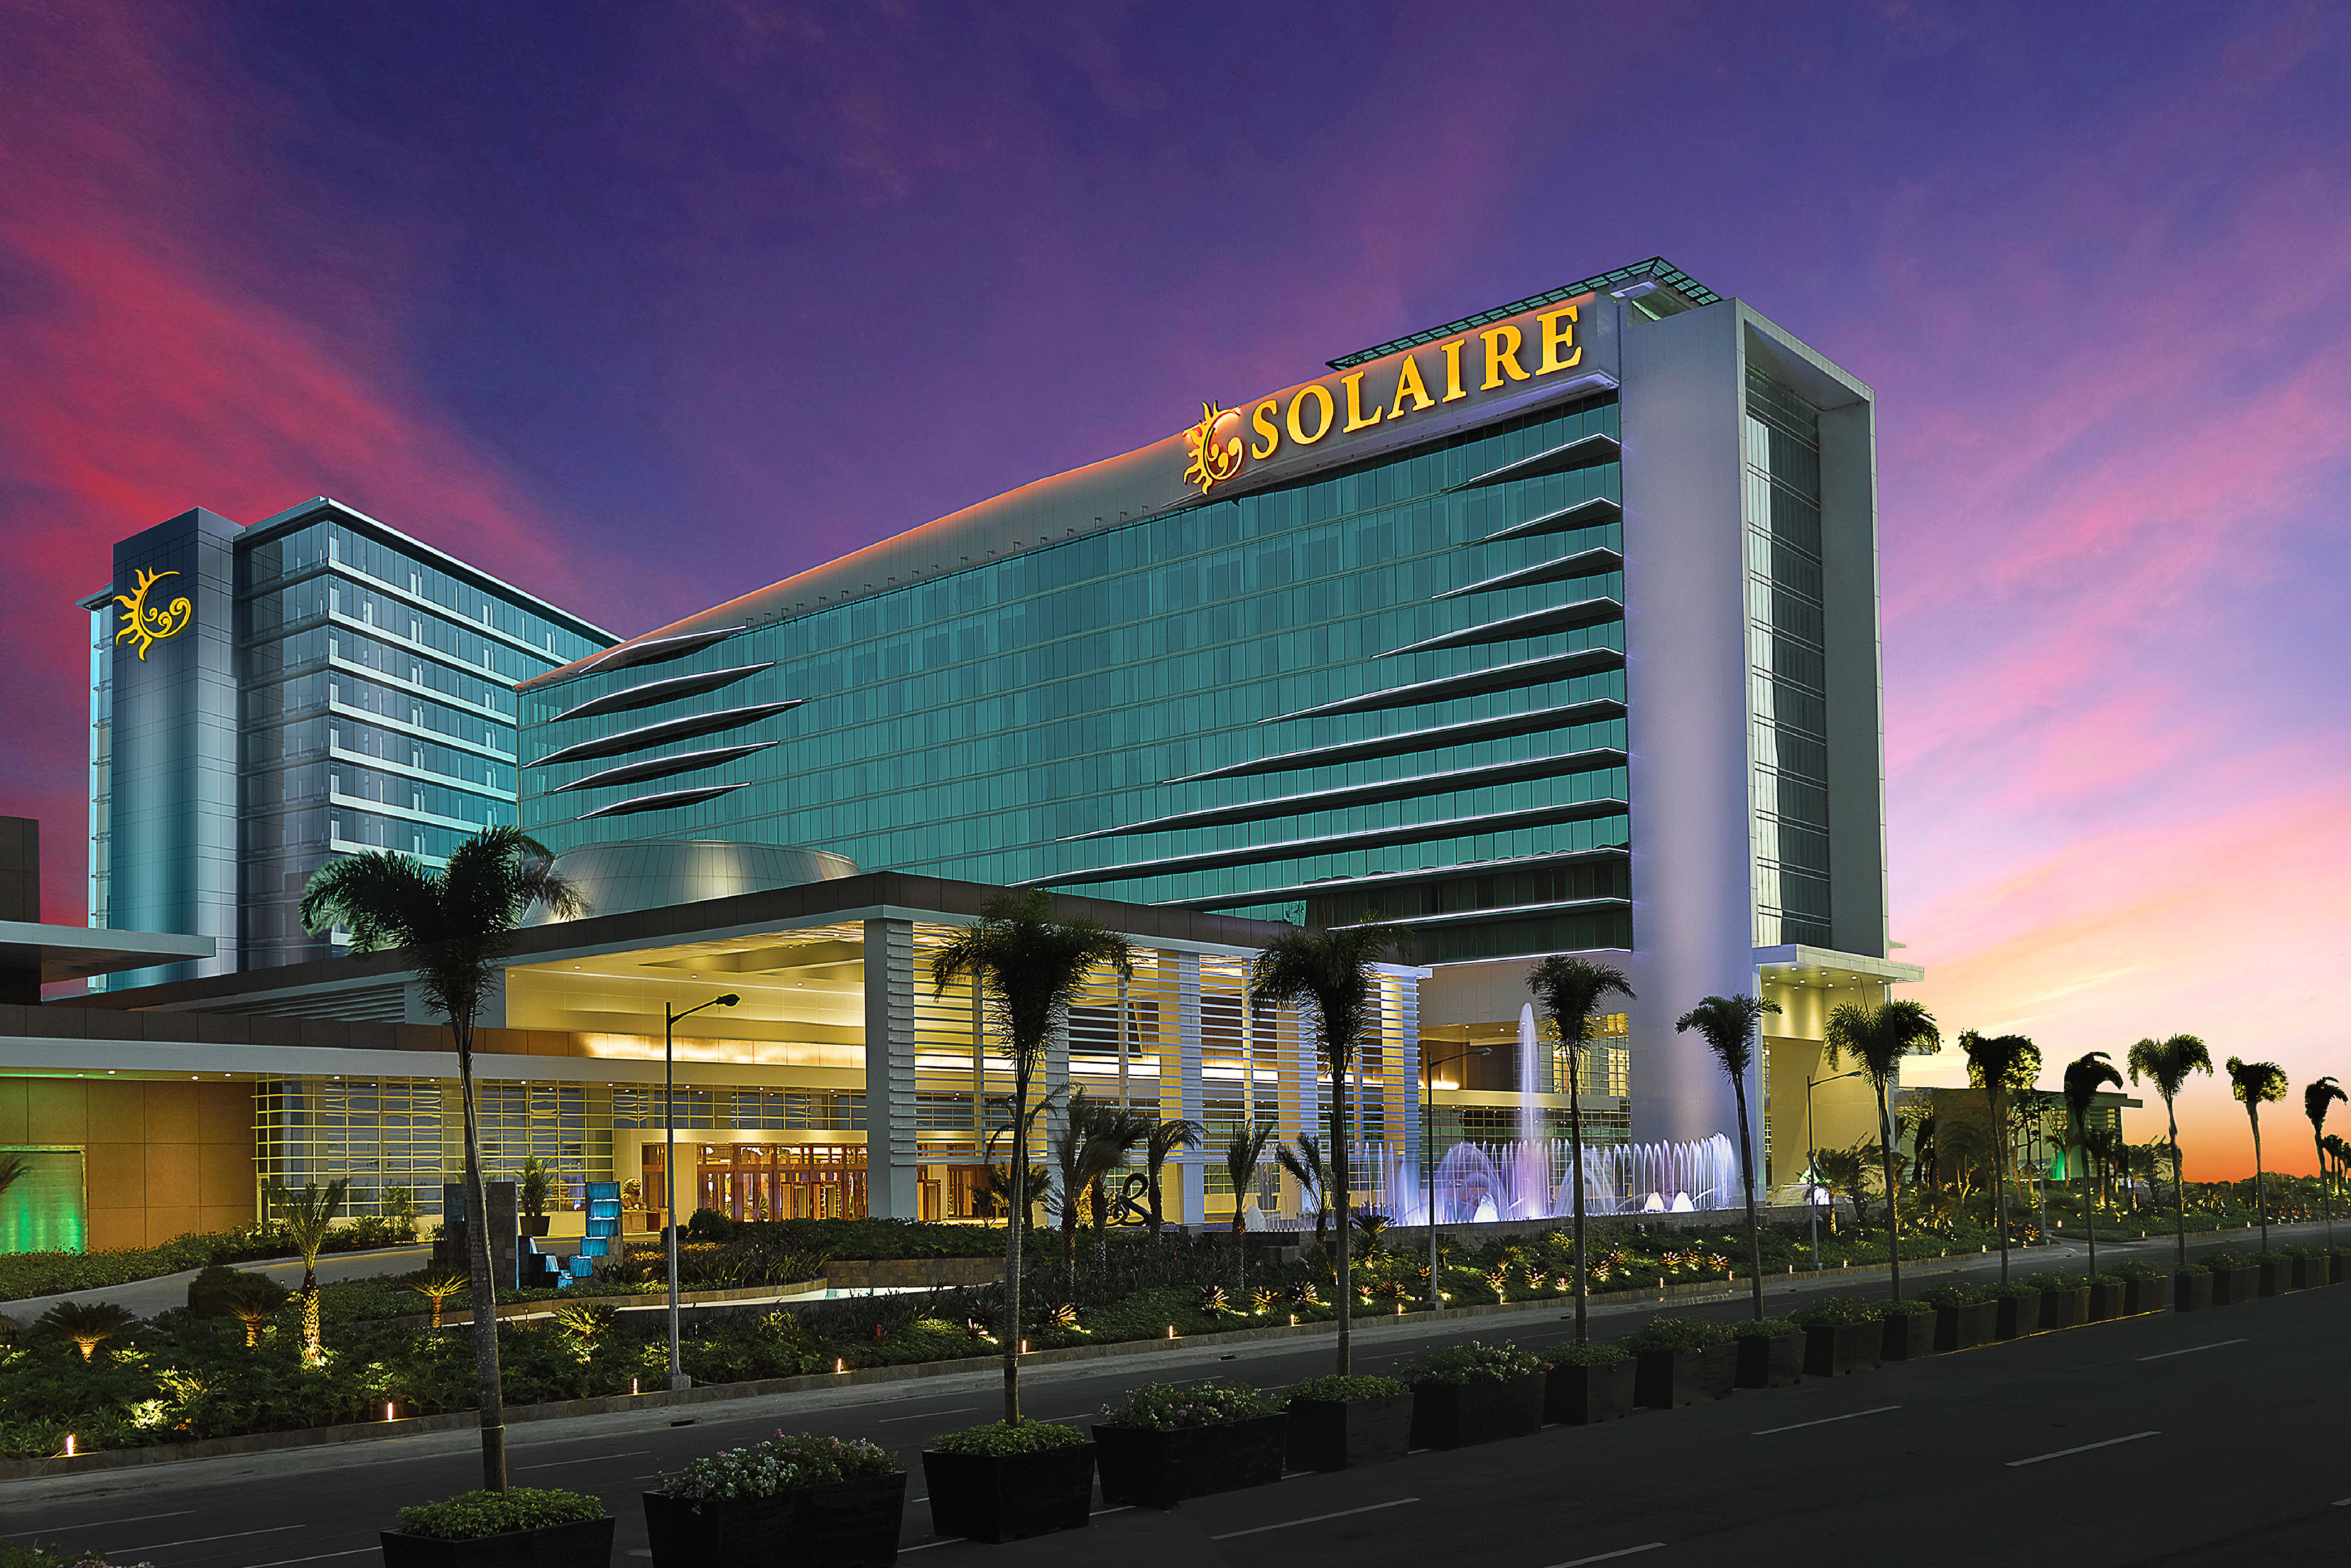 Solaire Hotel